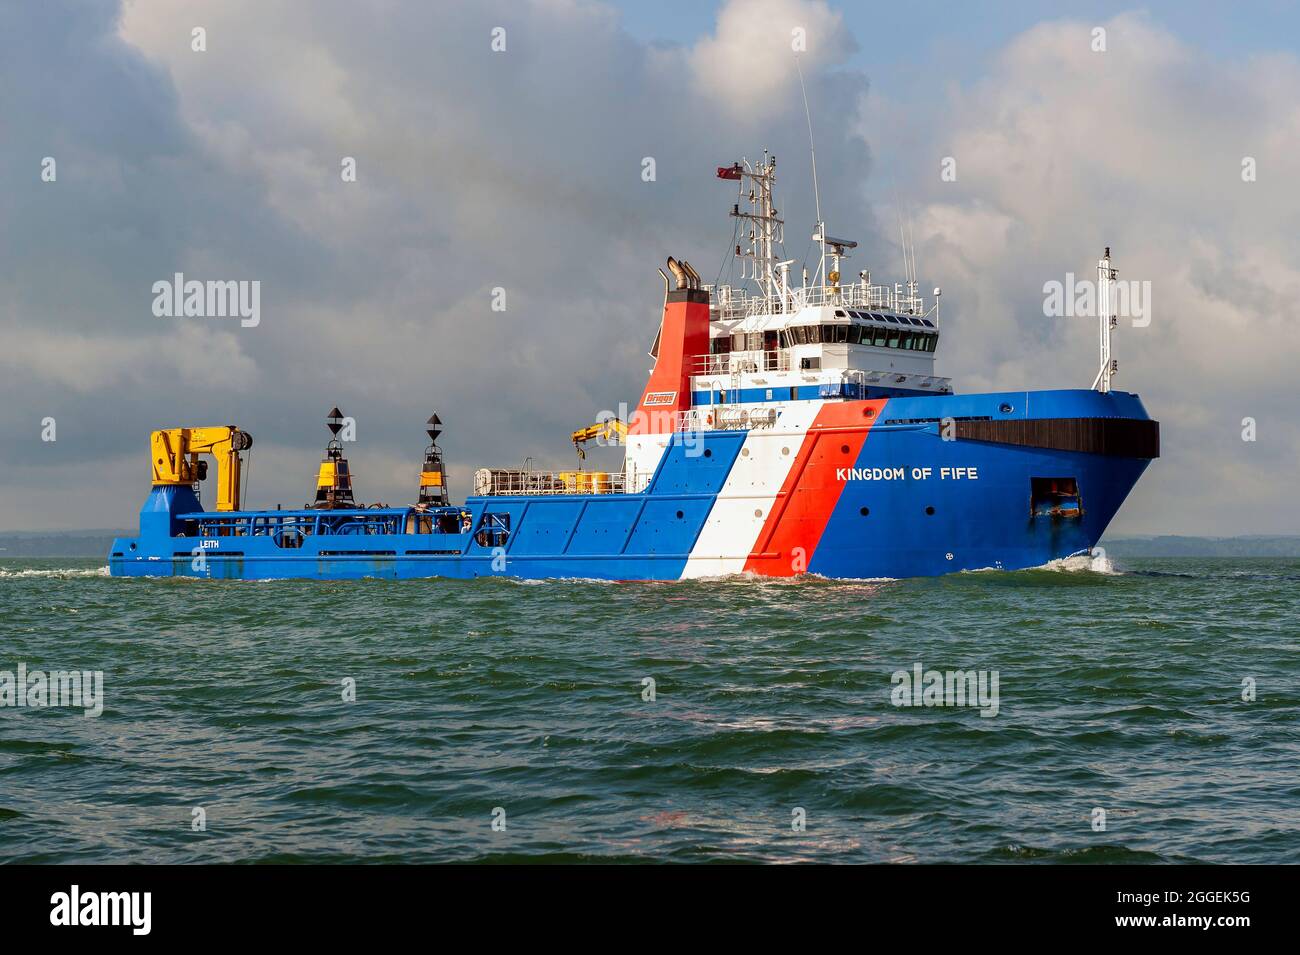 The anchor handling vessel Kingdom of Fife is operated by the Scottish company Briggs Marine - May 2009. Stock Photo